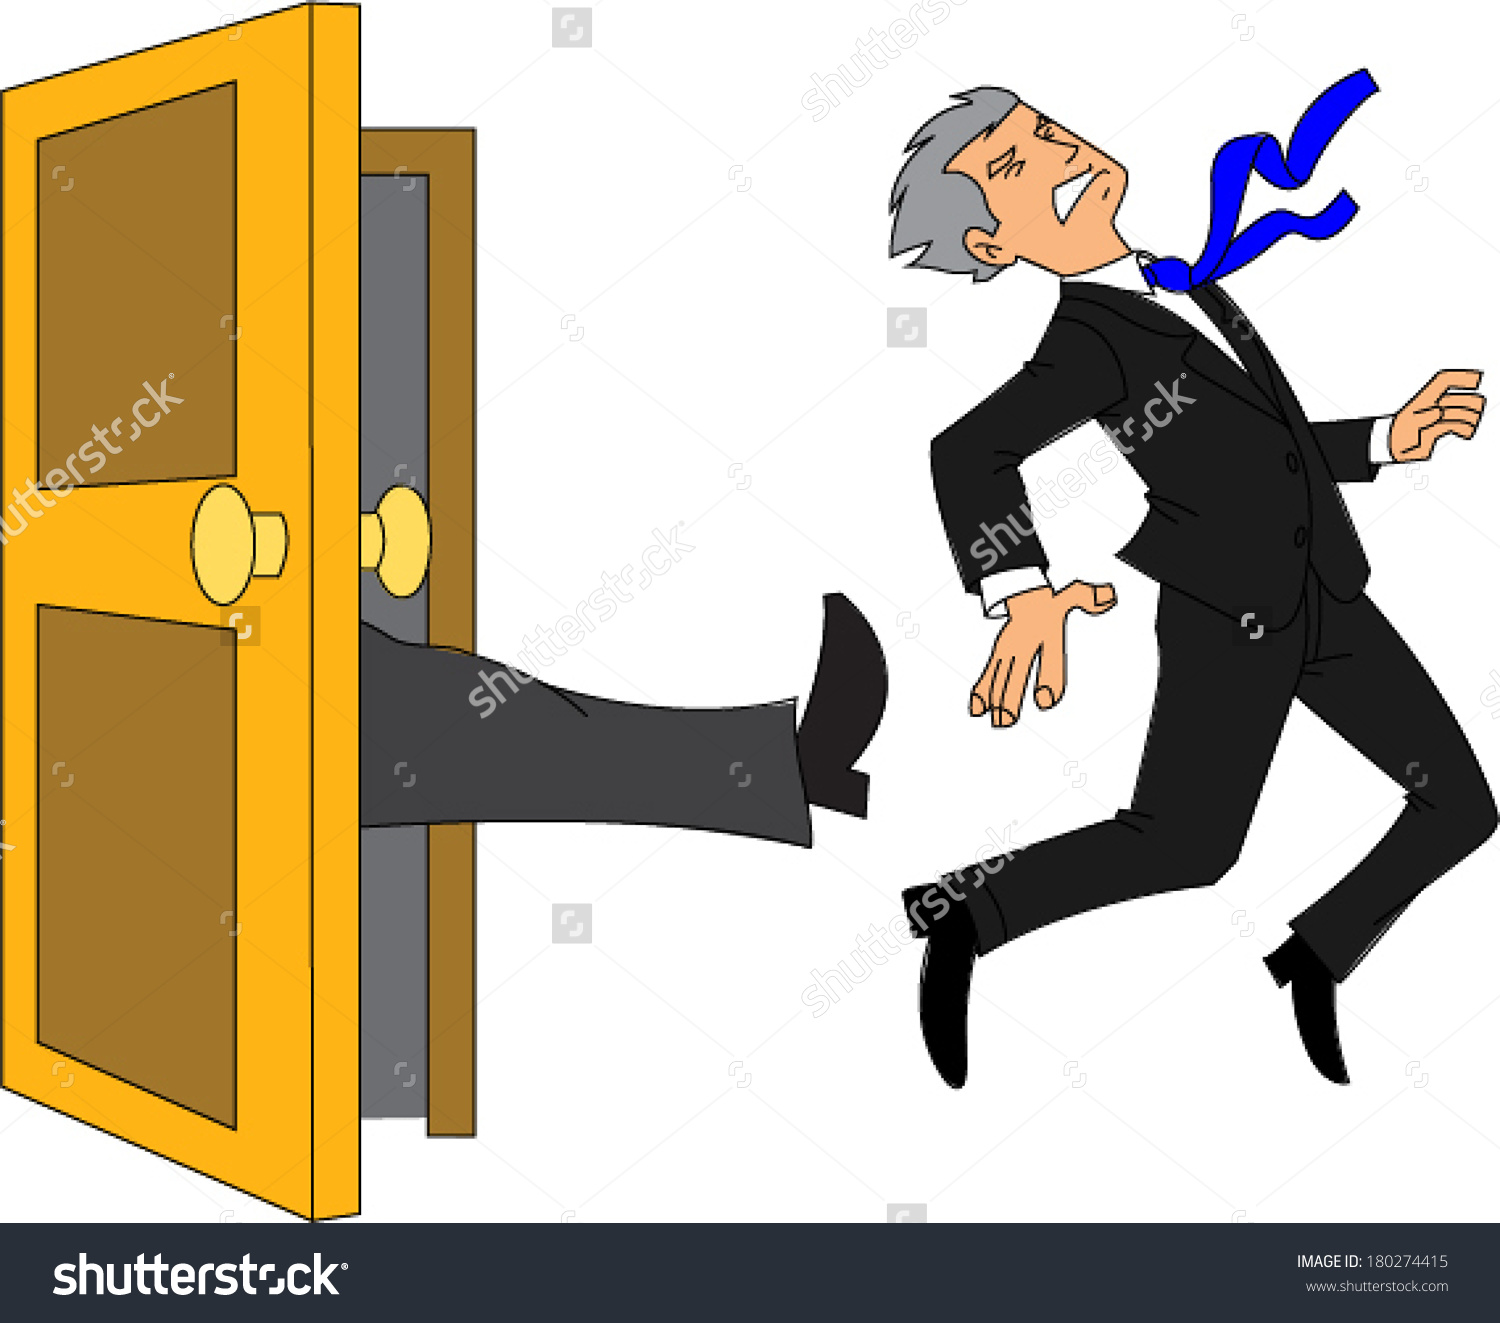 kick-out-clipart-11.jpg